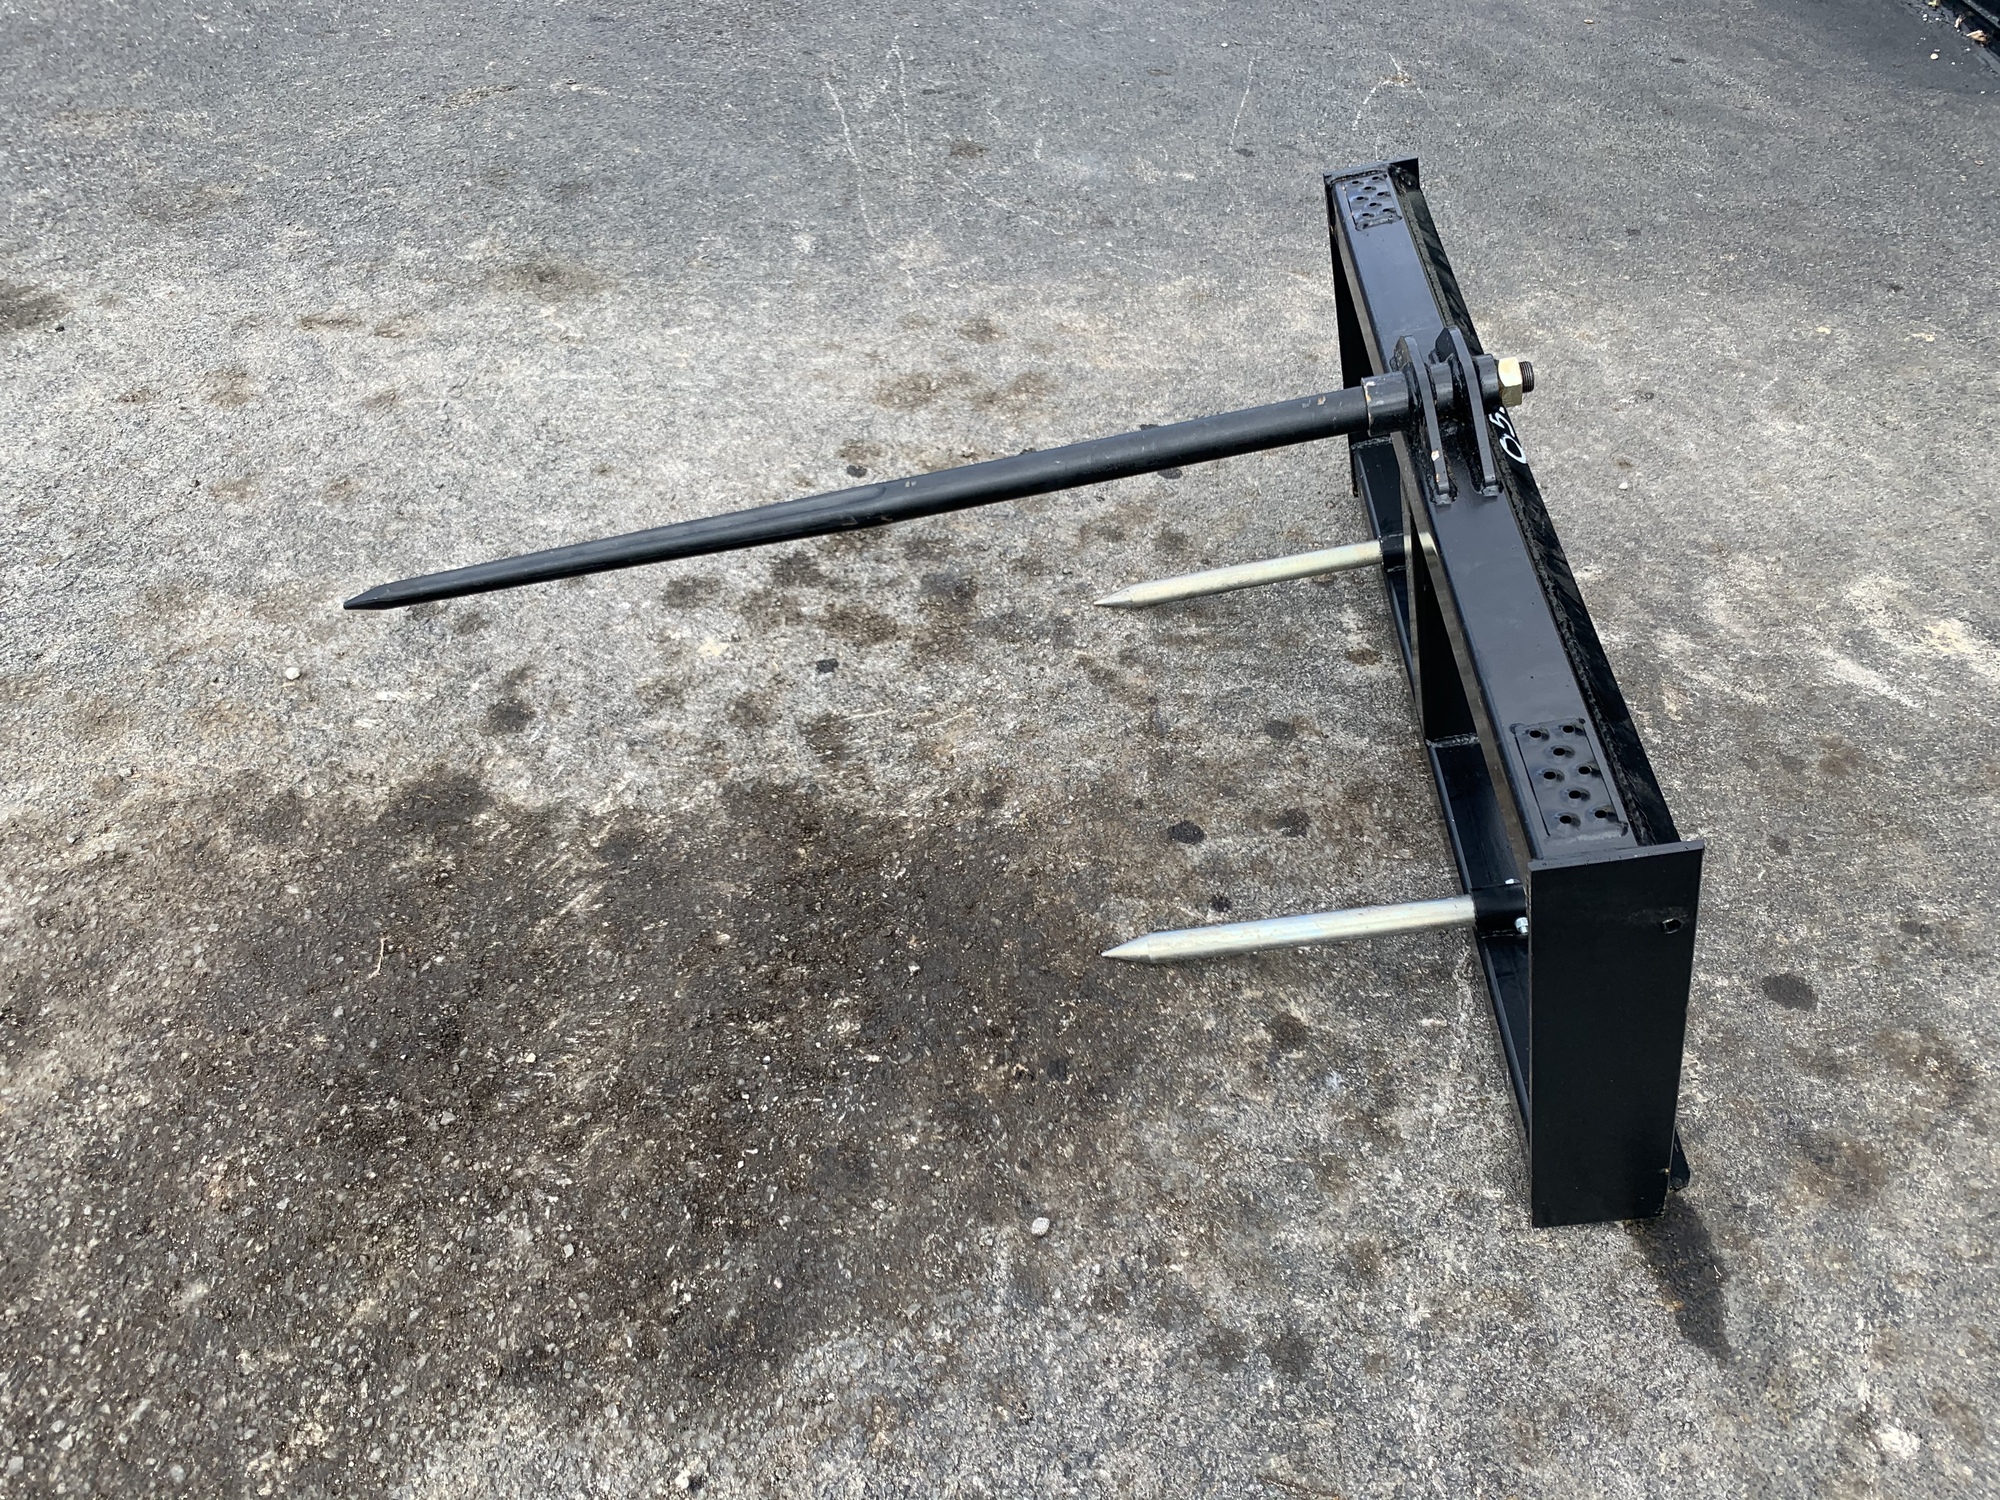 2021 ES Attachments Quick Attach Hay Spear Hay Spear | County Equipment Company LLC